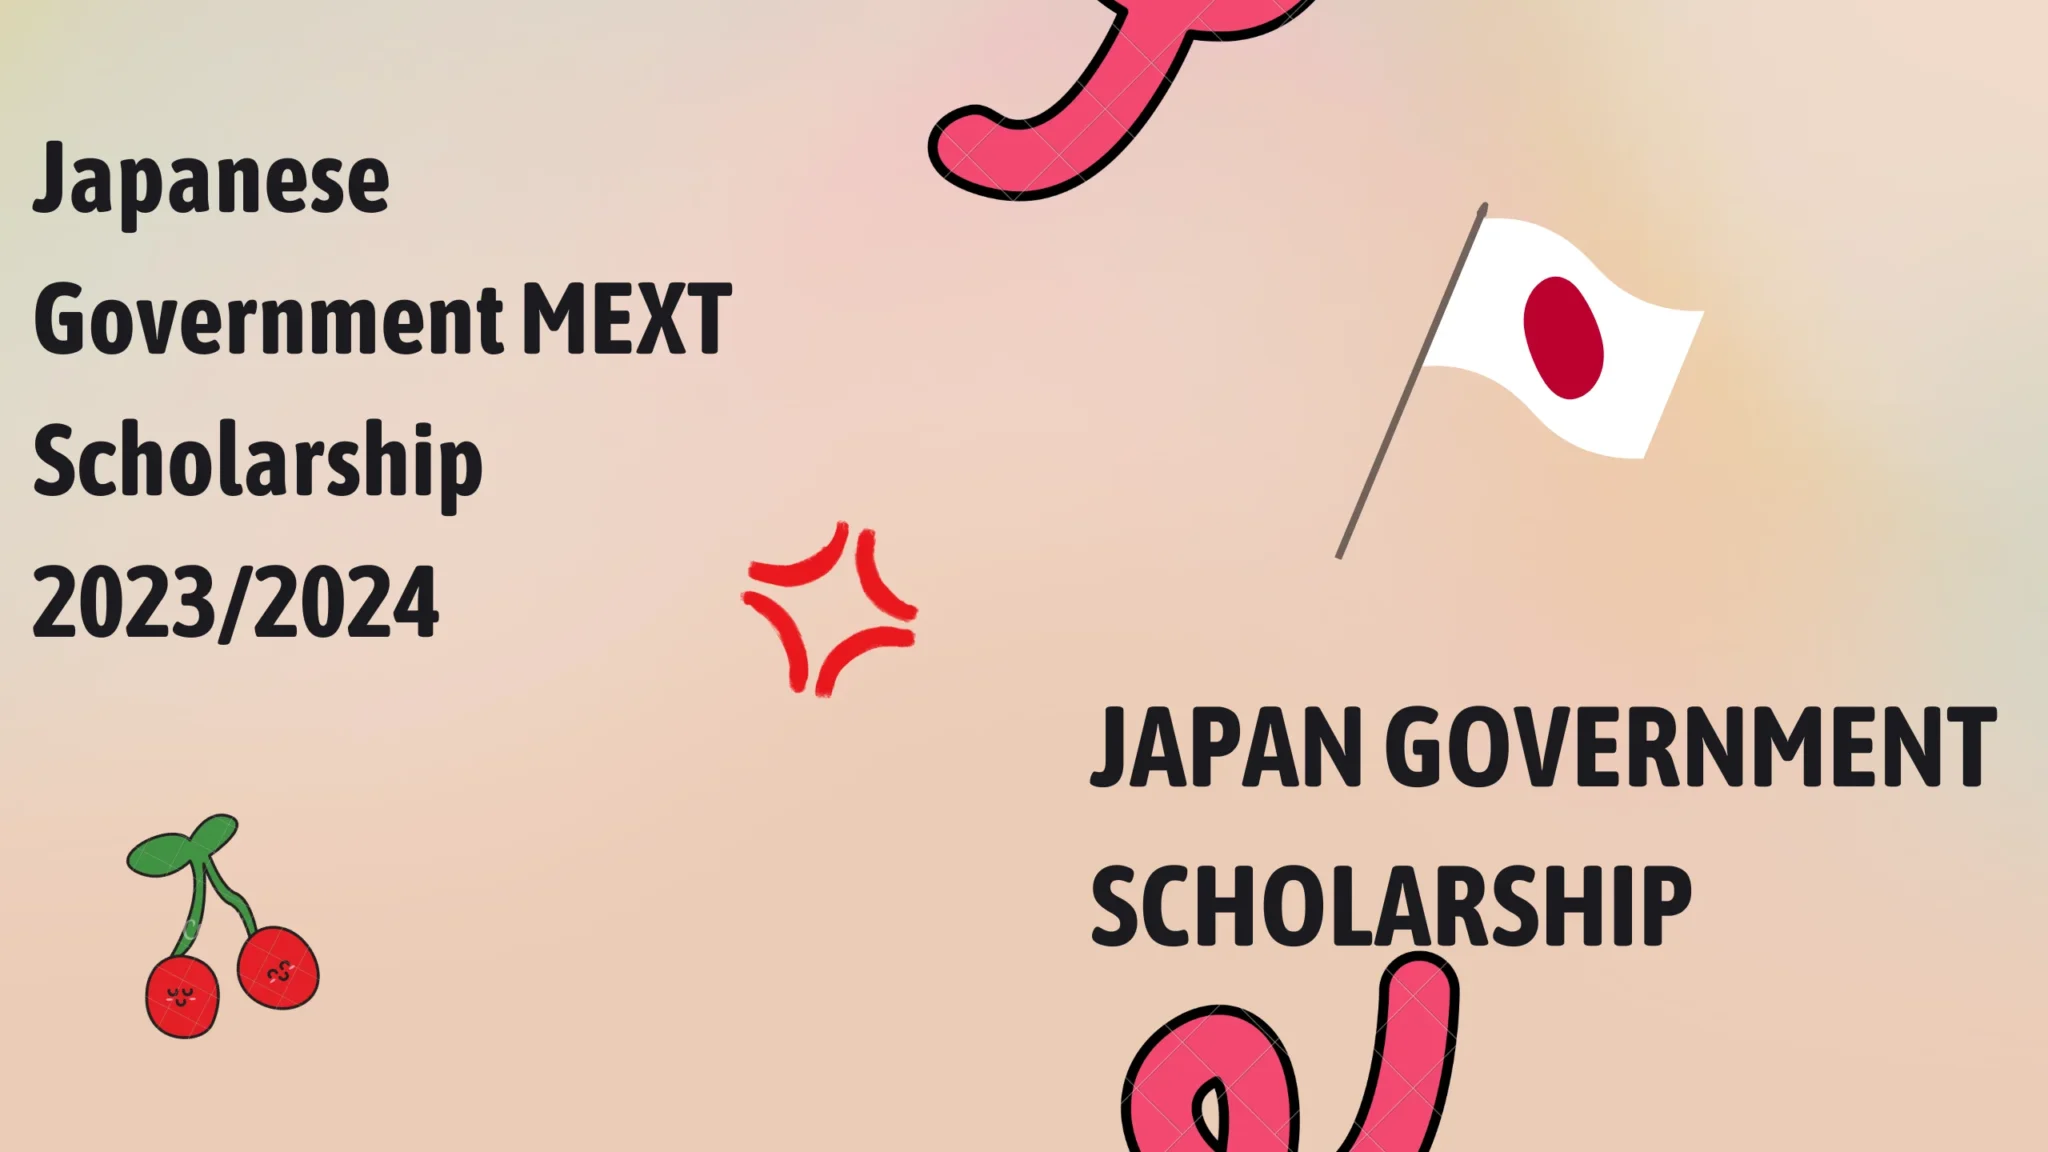 How To Apply | Japan Embassies And Consulates For MEXT Scholarship 2023/2024